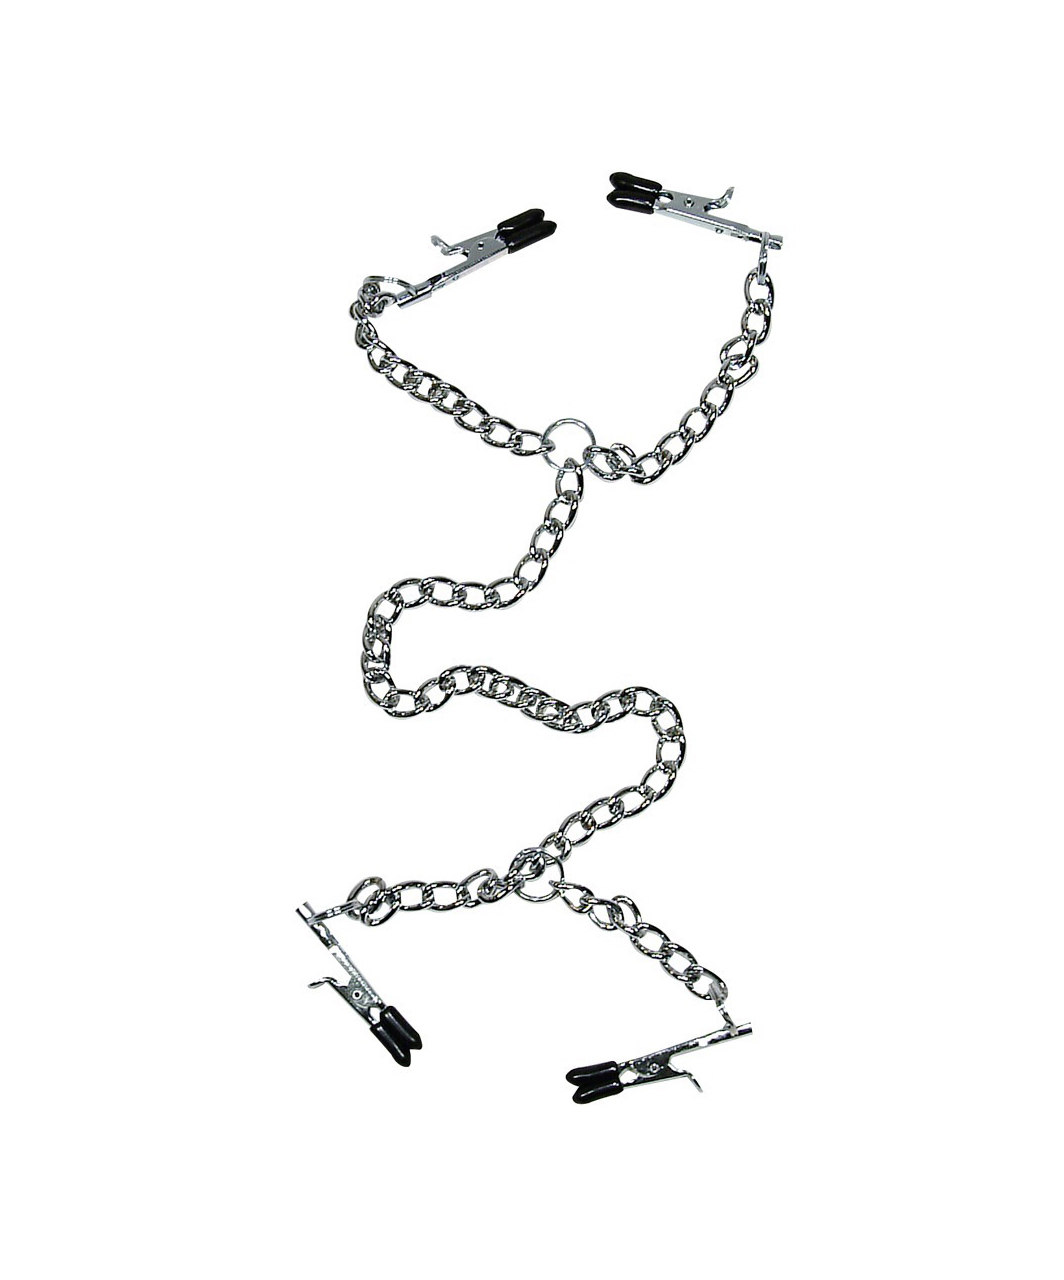 Sextreme metal nipple & labia clamps with chain